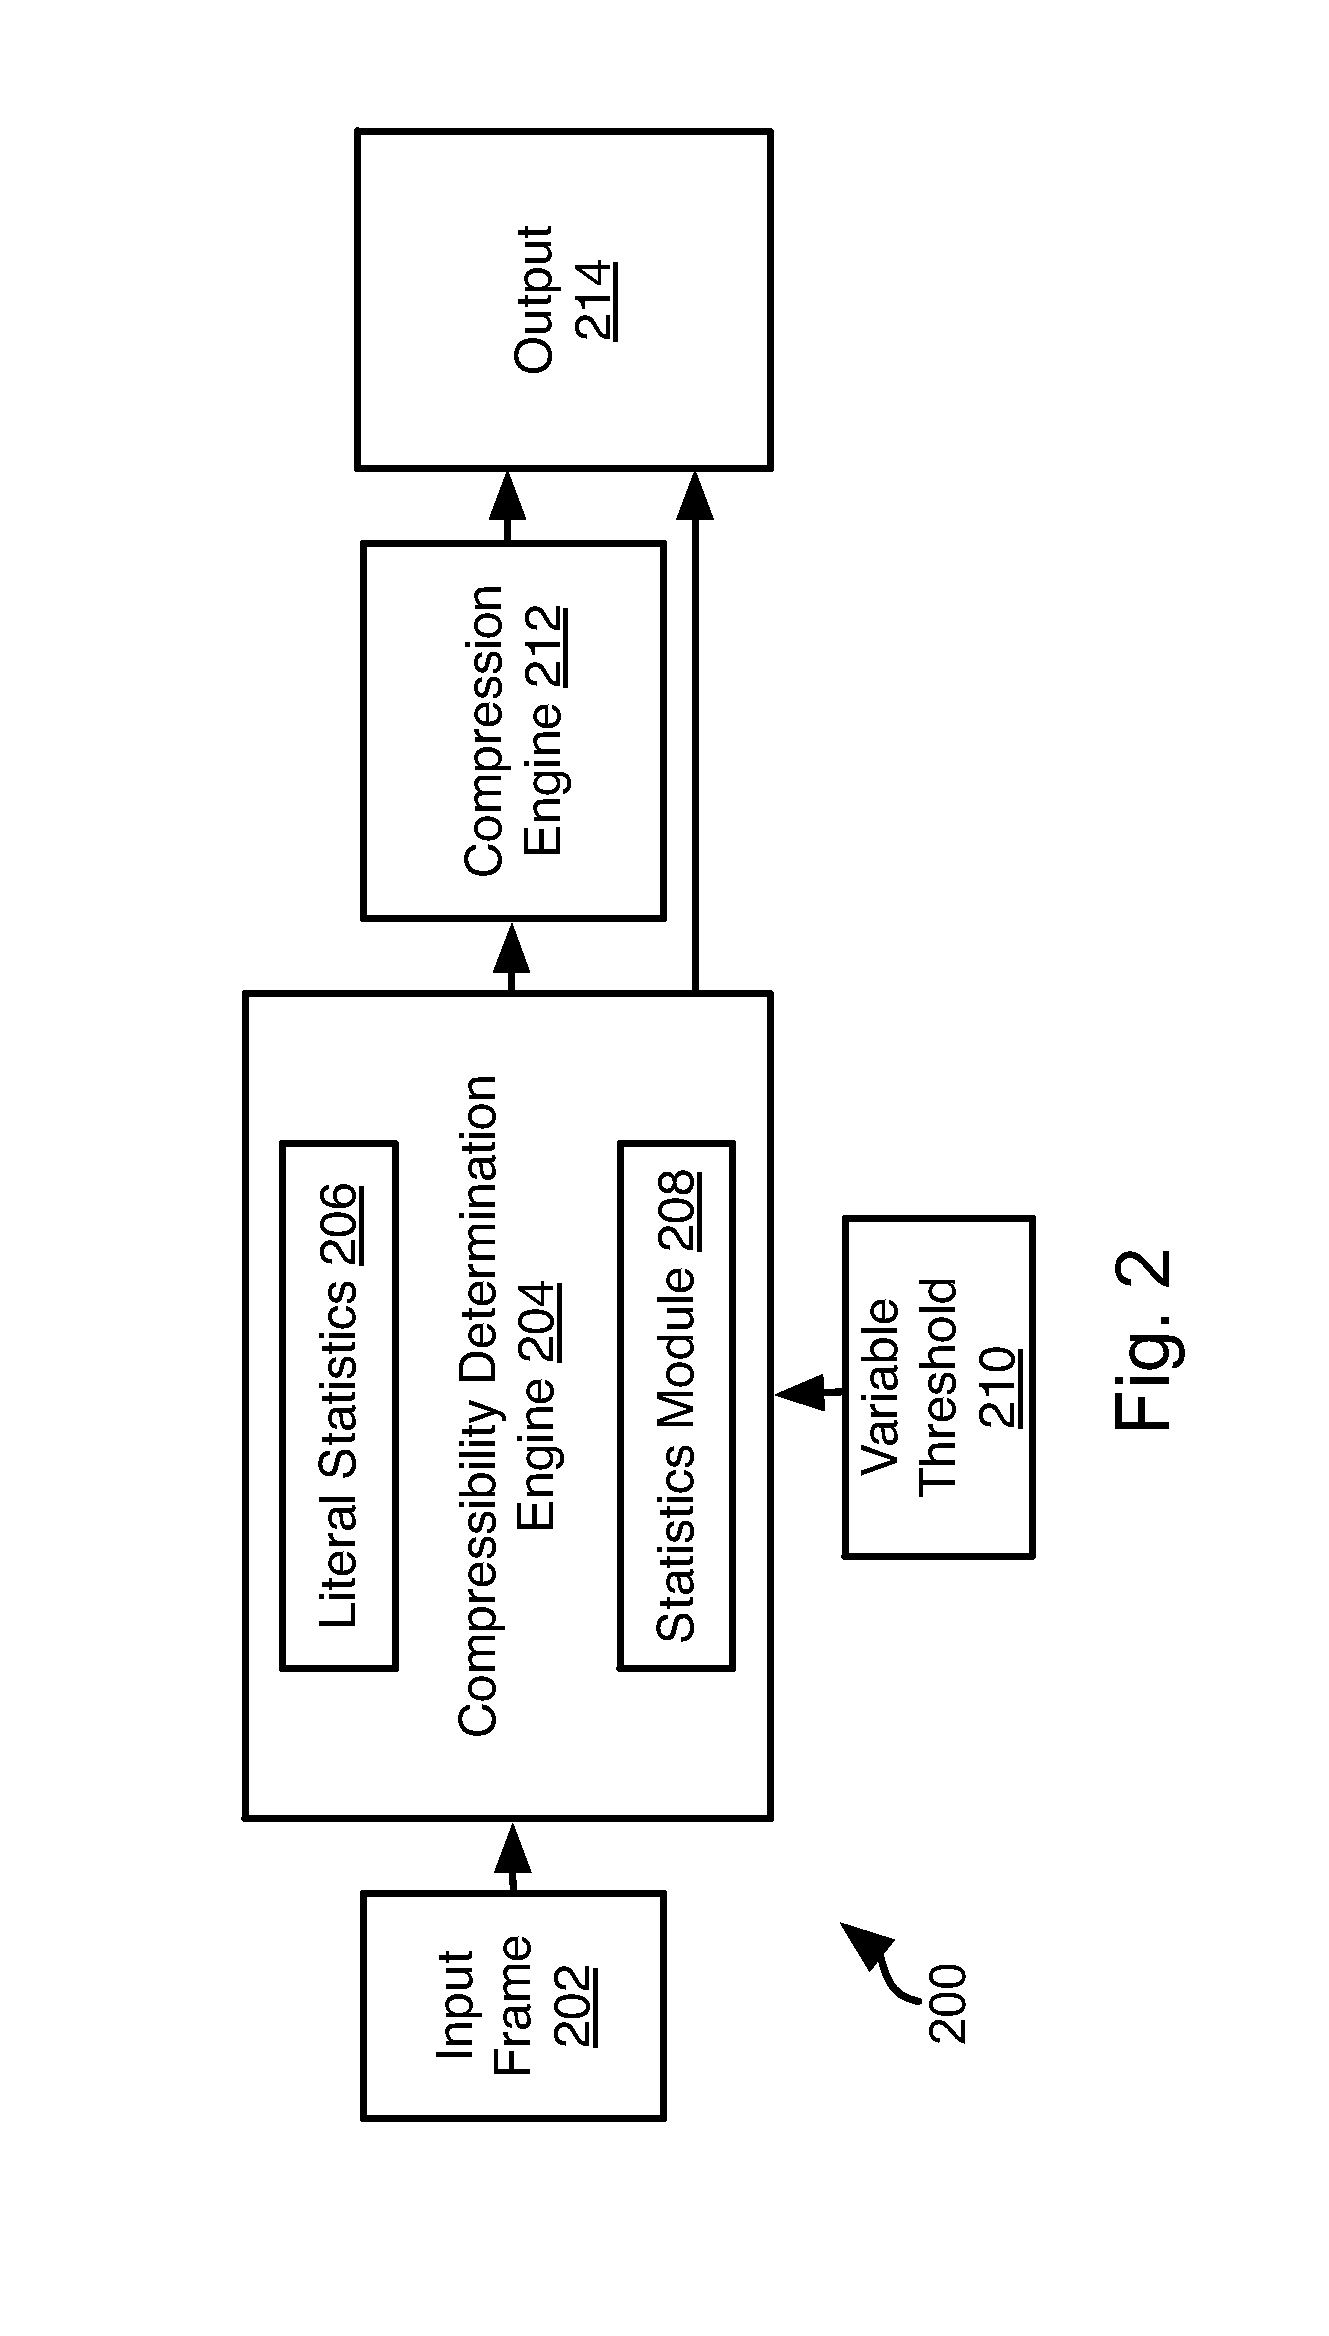 Statistical compressibility determination system and method